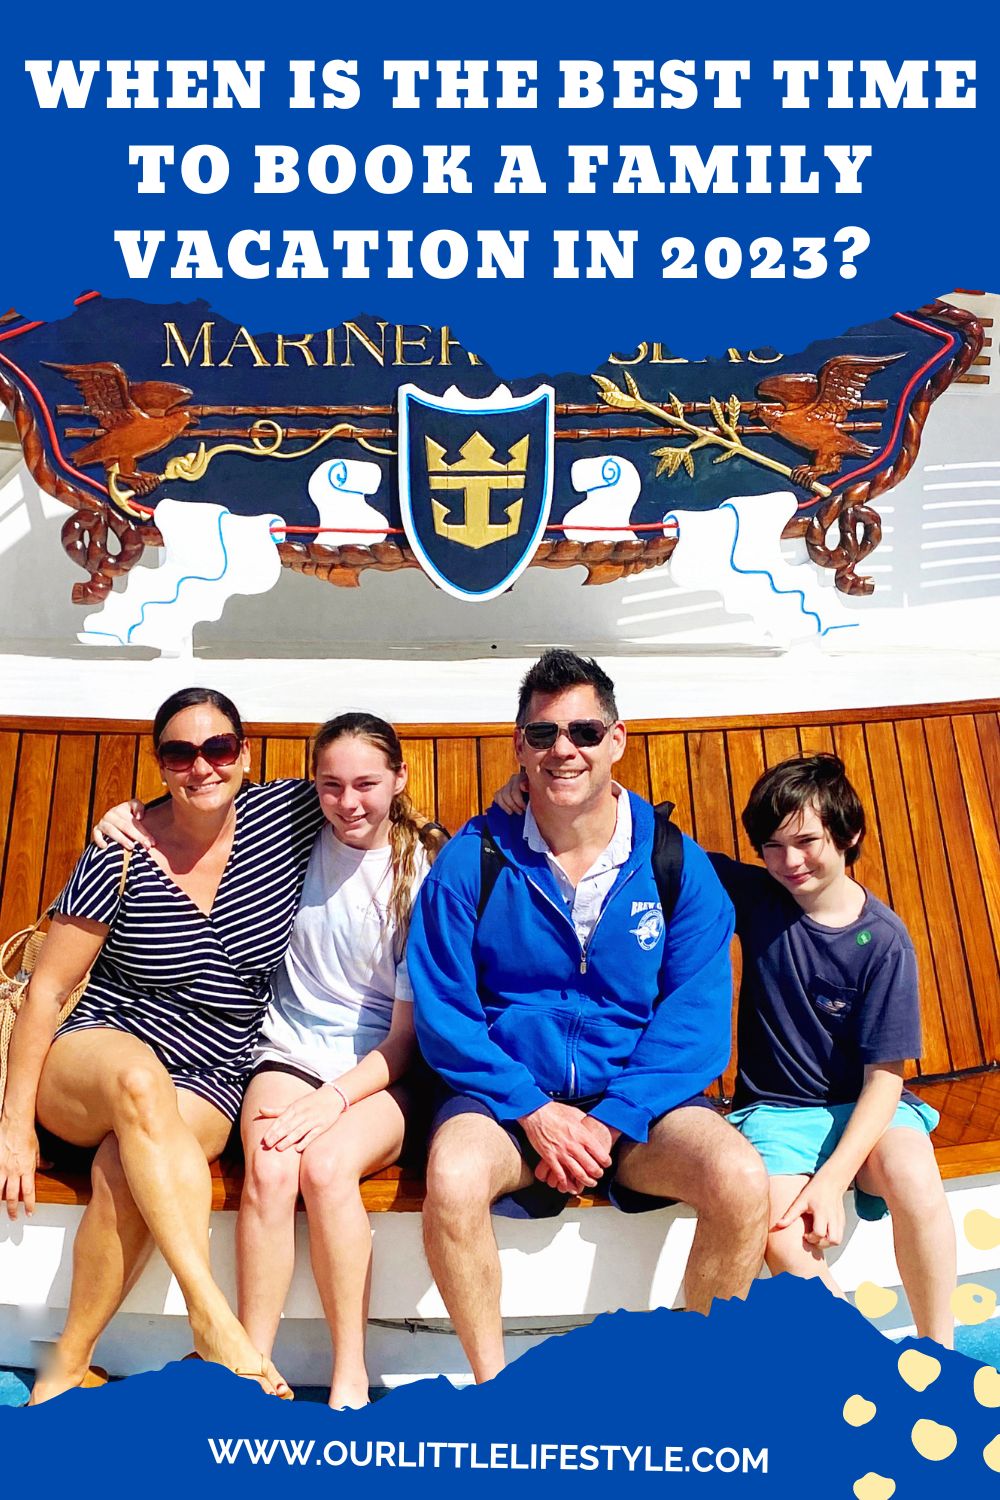 Best Time to Book a Family Vacation in 2023